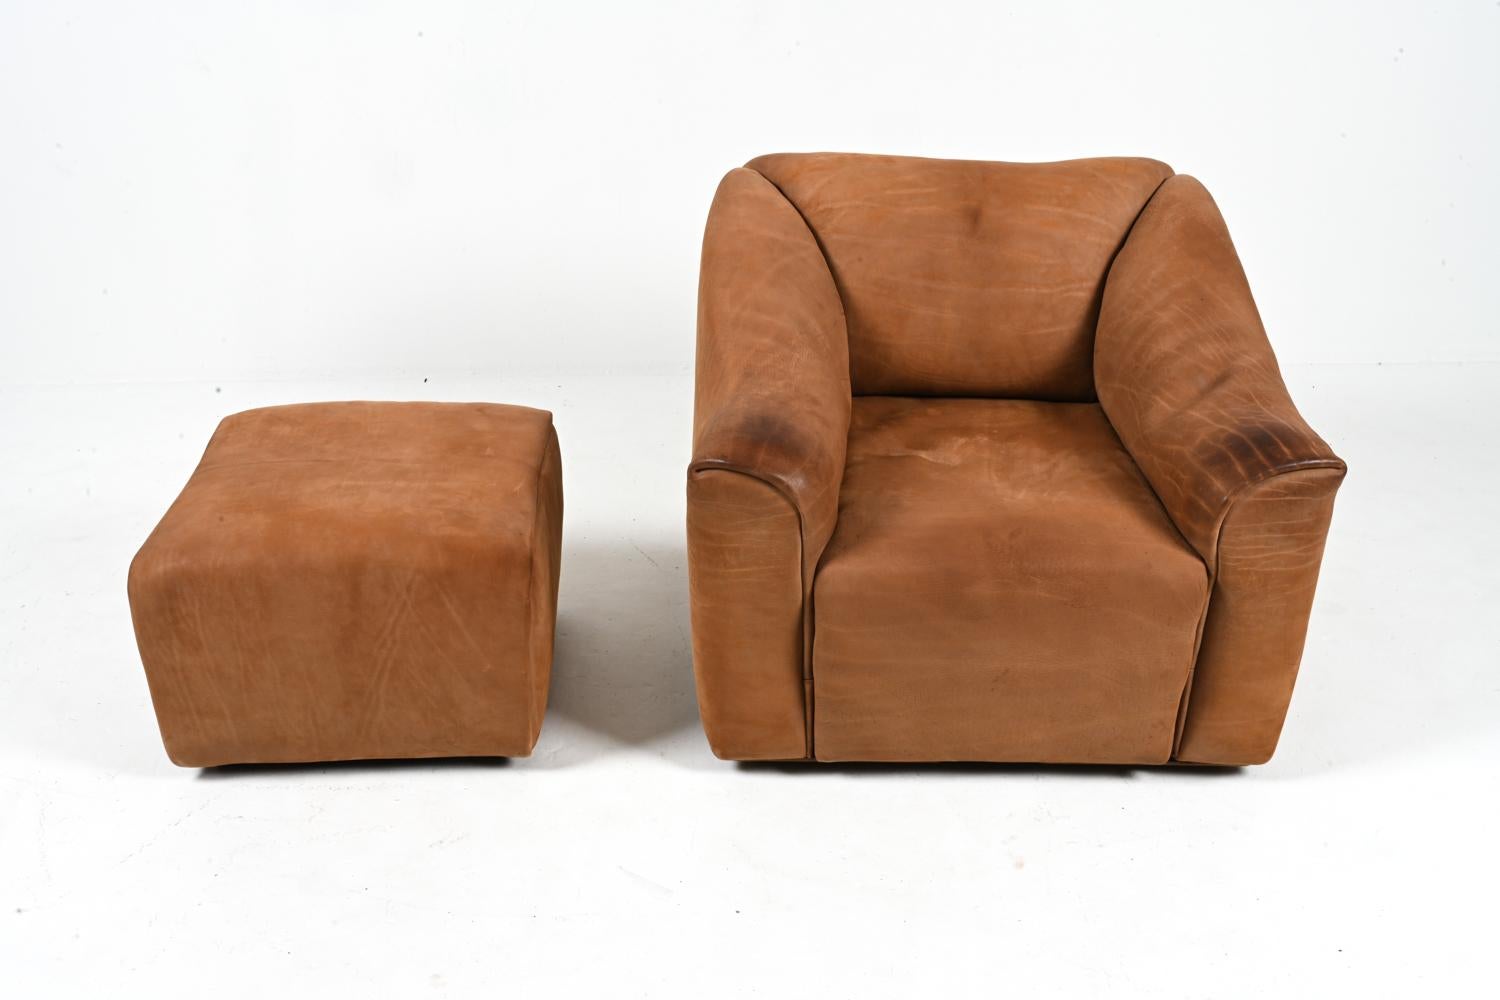 De Sede DS-47 Lounge Chair & Ottoman in Nubuck Leather, c. 1970's In Good Condition For Sale In Norwalk, CT